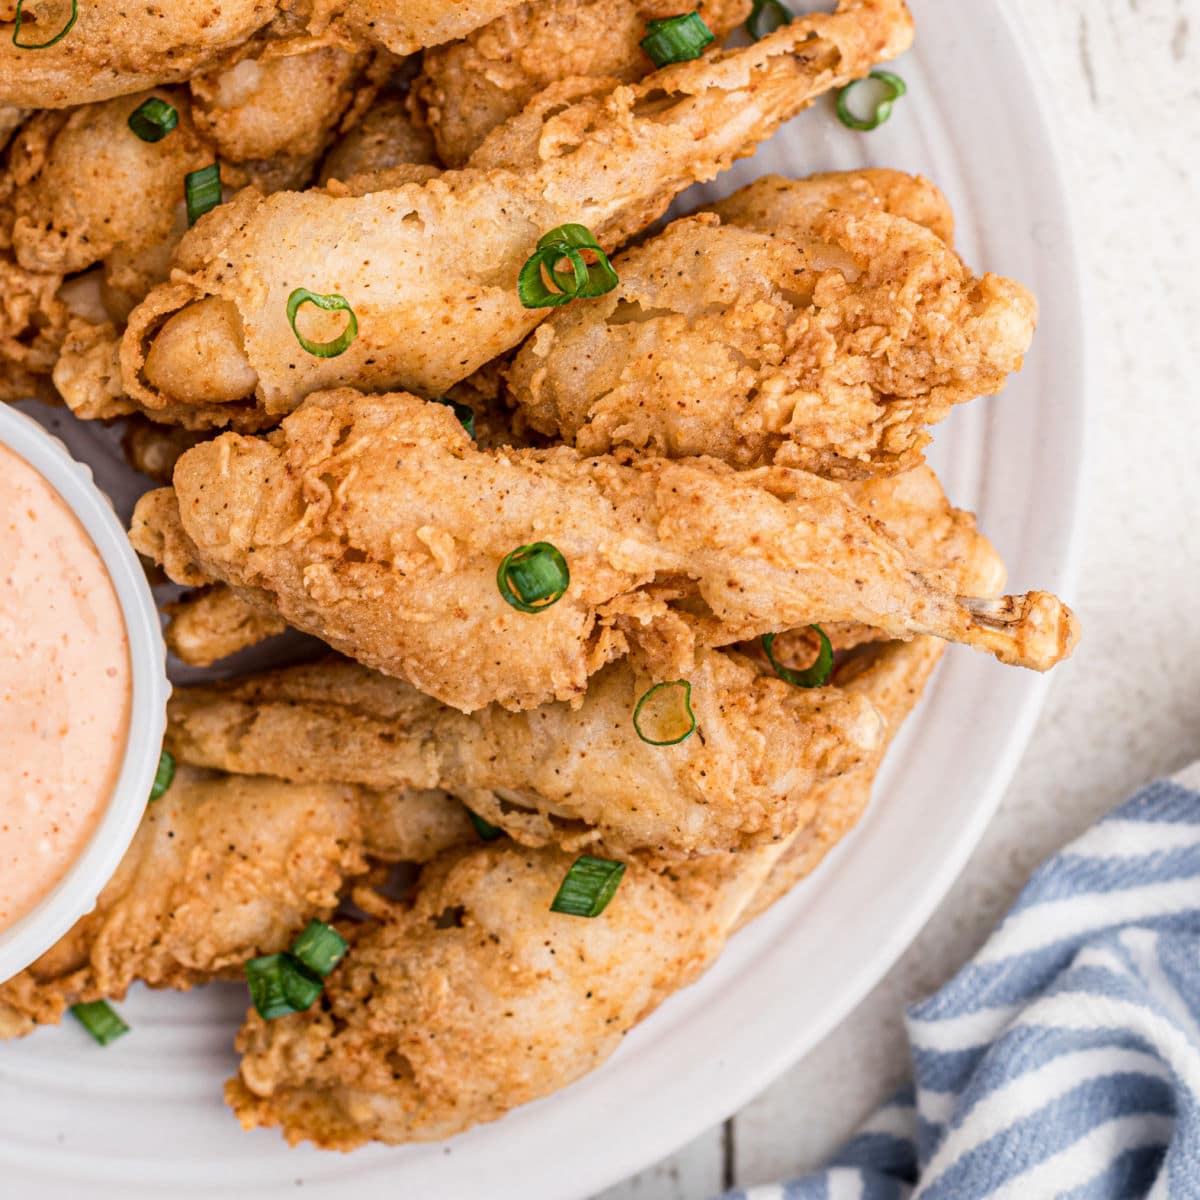 https://thecaglediaries.com/wp-content/uploads/2022/05/Fried-Frog-Legs.jpg